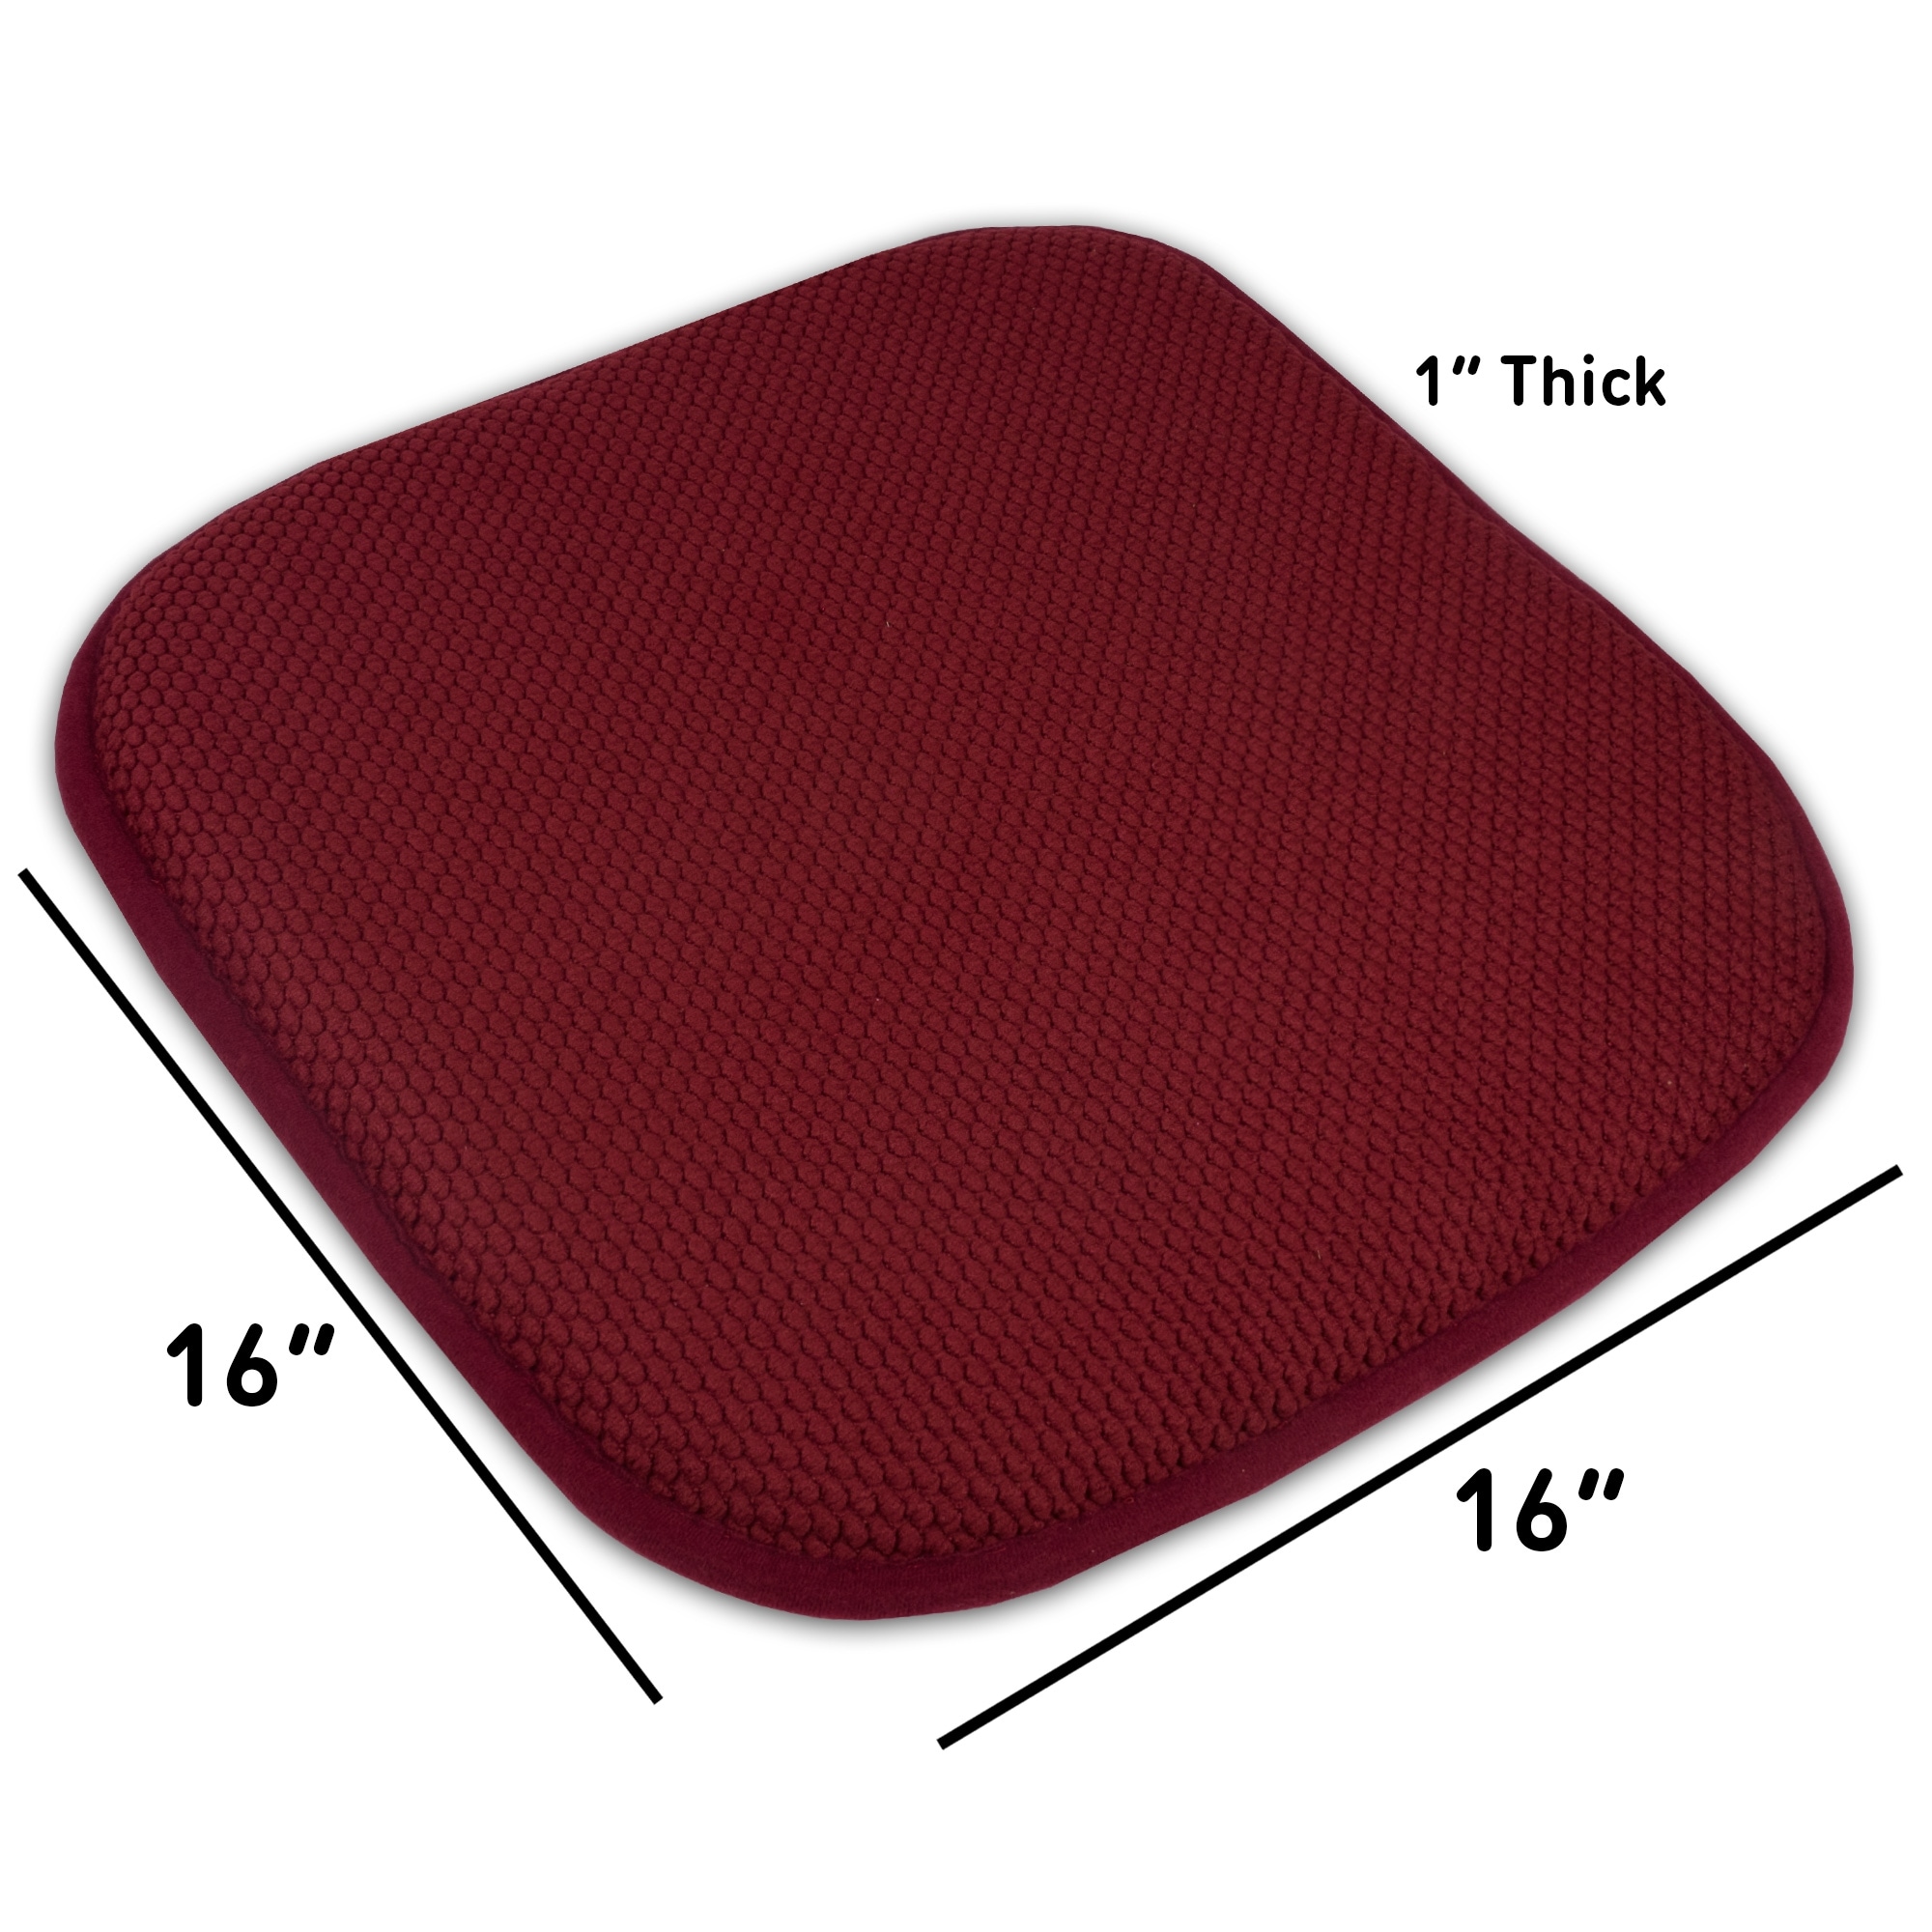 ZYBCQL New Chinese Chair Cushion Seat Pad,Non Slip 4 cm Sponge Seat  Cushions Washable Floor Mat with Removable Cover for Room Decor-A